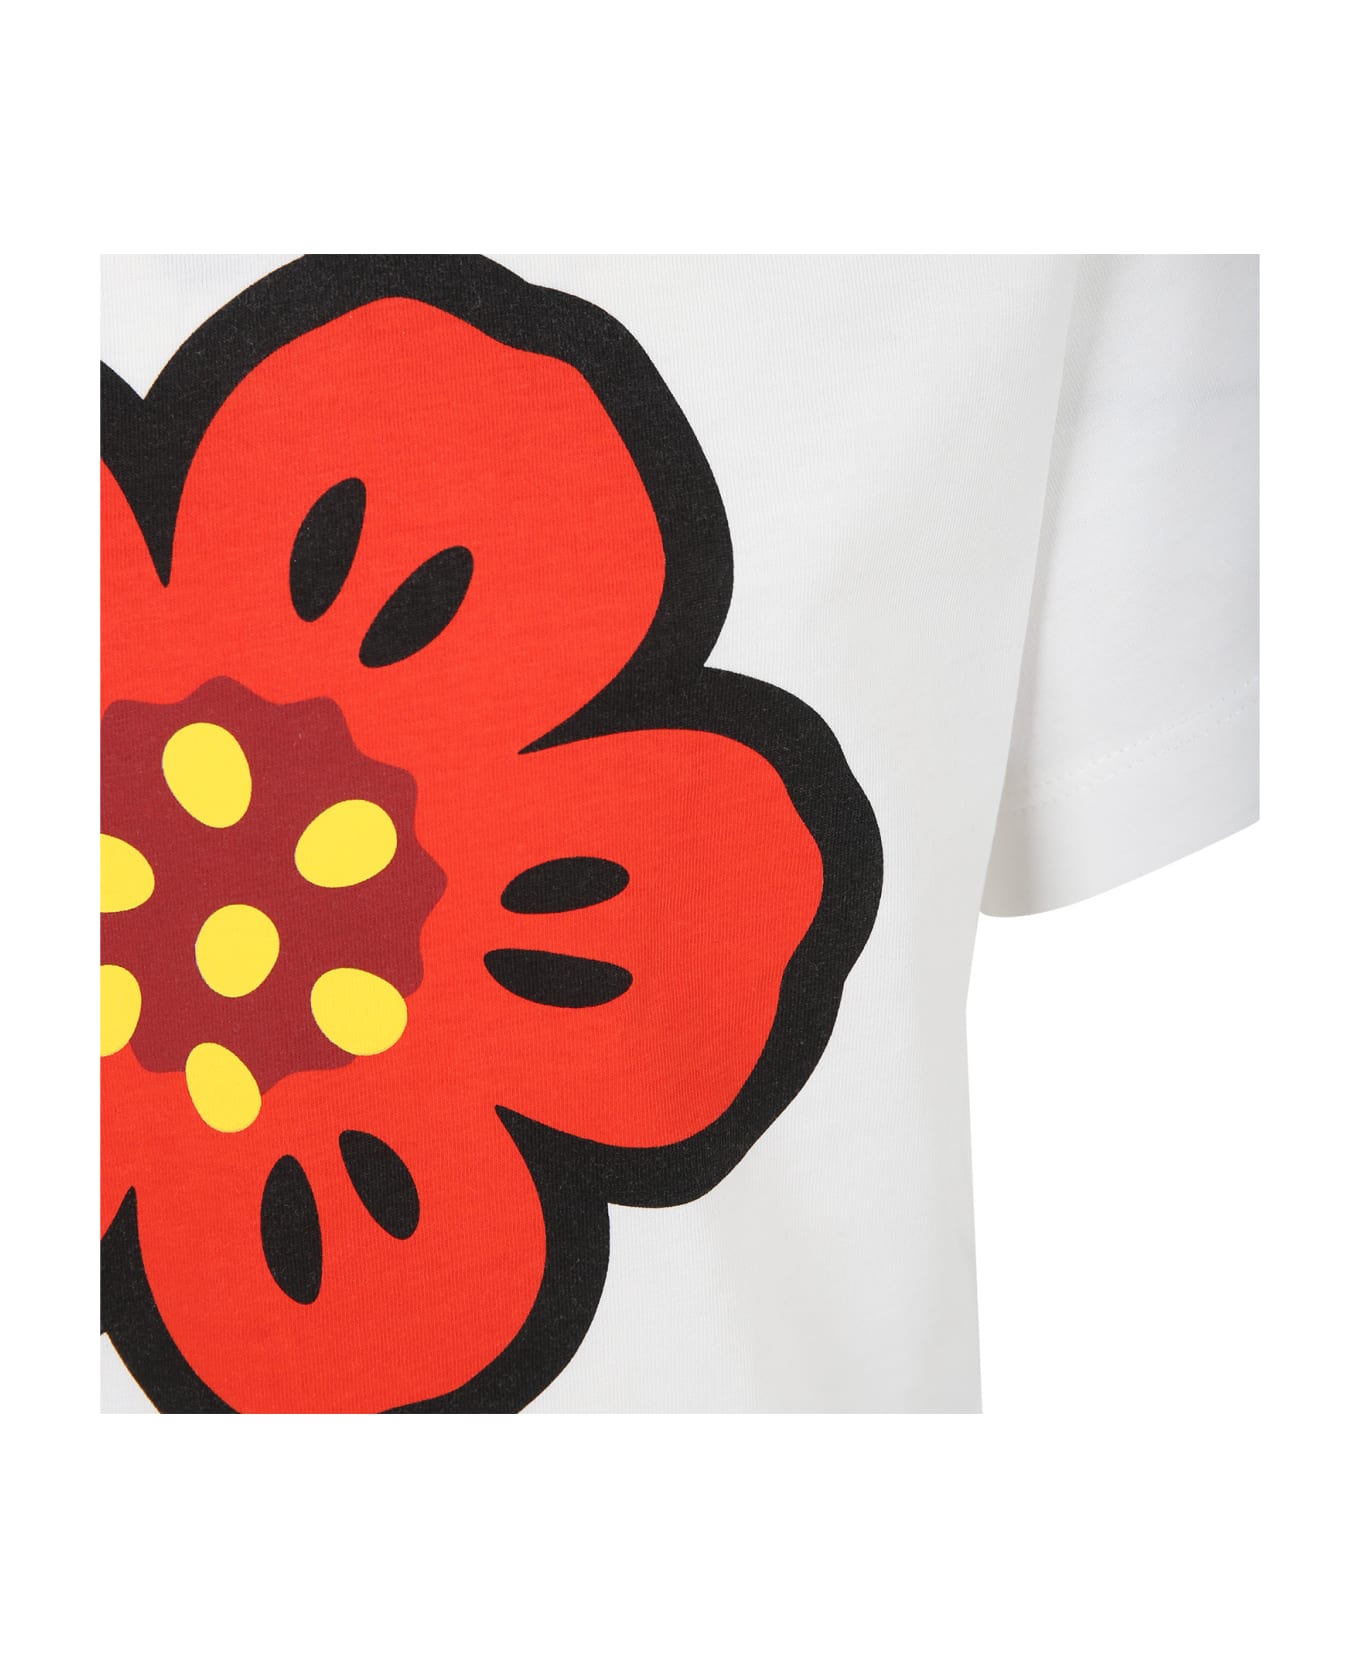 Kenzo Kids White T-shirt For Girl With Flower - Bianco